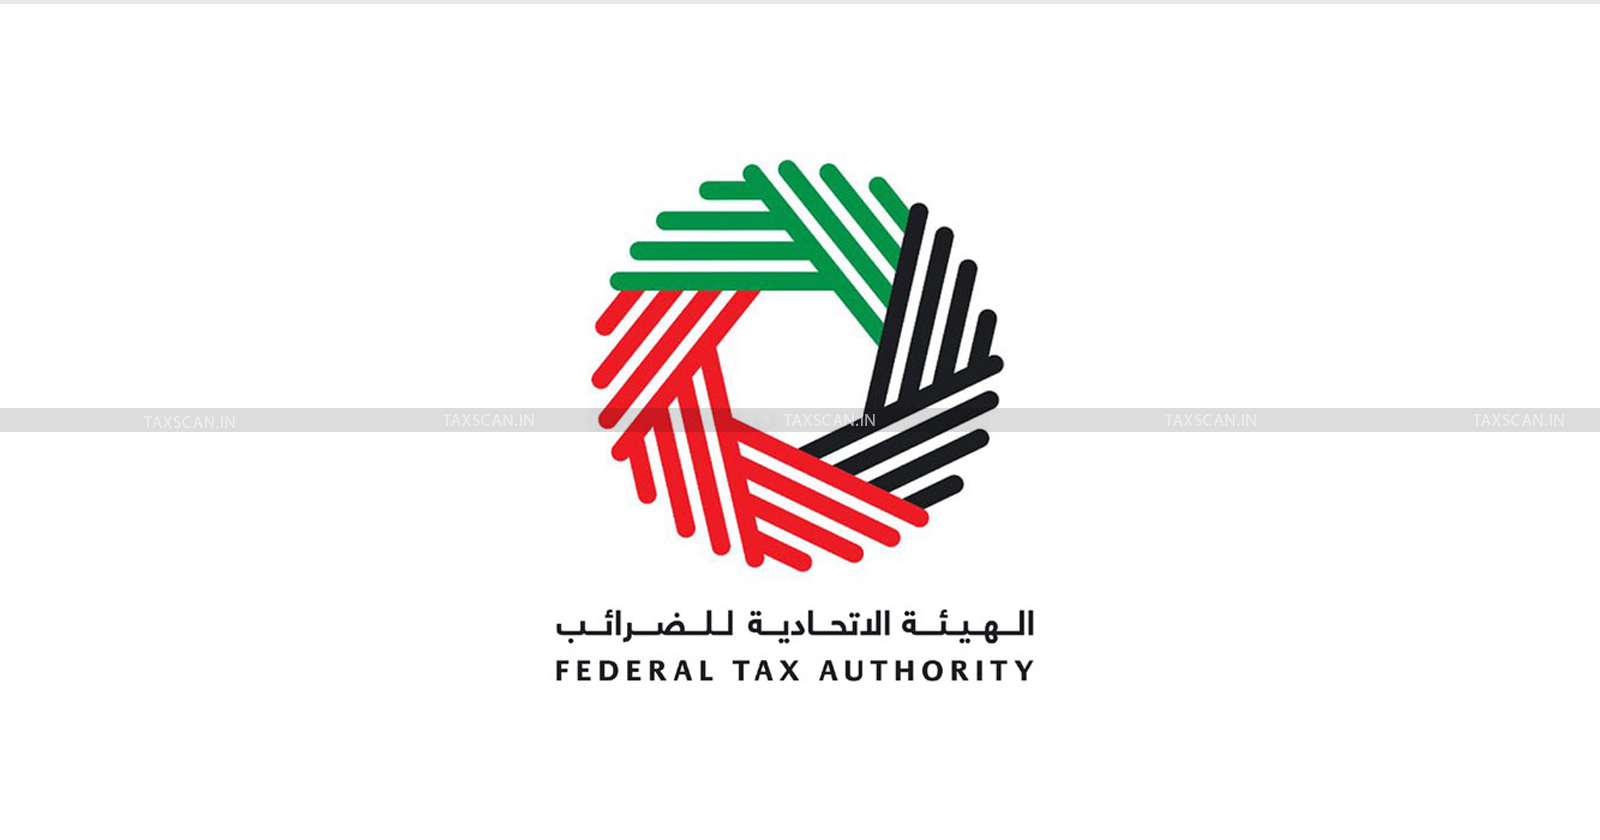 UAE - Federal Tax Authority - License Holders - Submit Corporate Tax - Registration Applications - taxscan